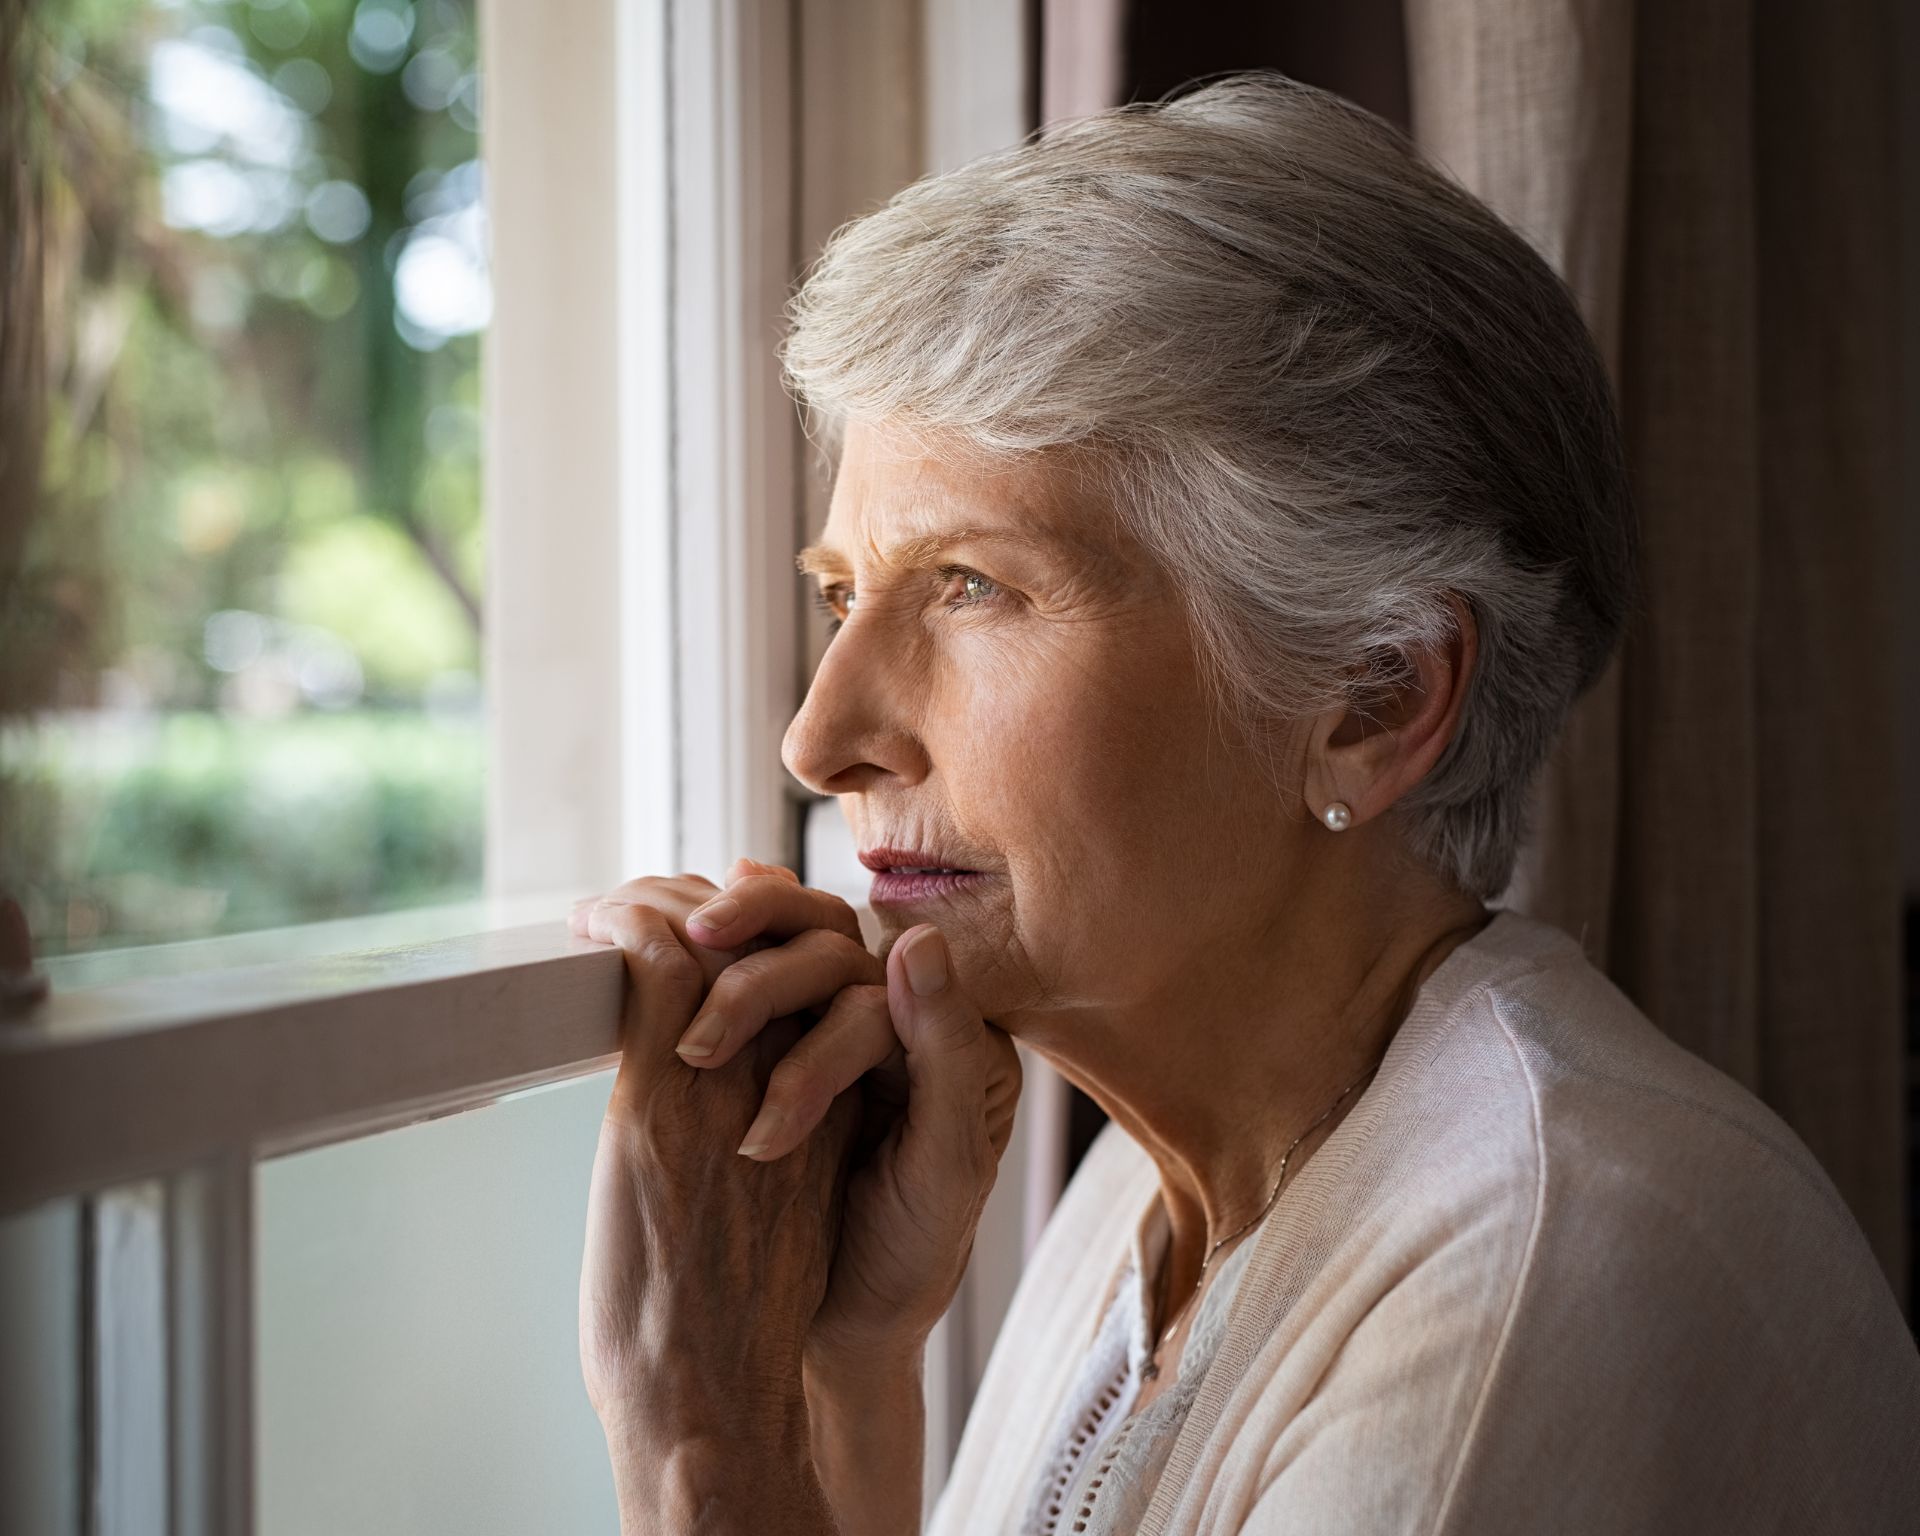 Cultivating Connections: Advanced Care’s Approach to Combating Senior Isolation